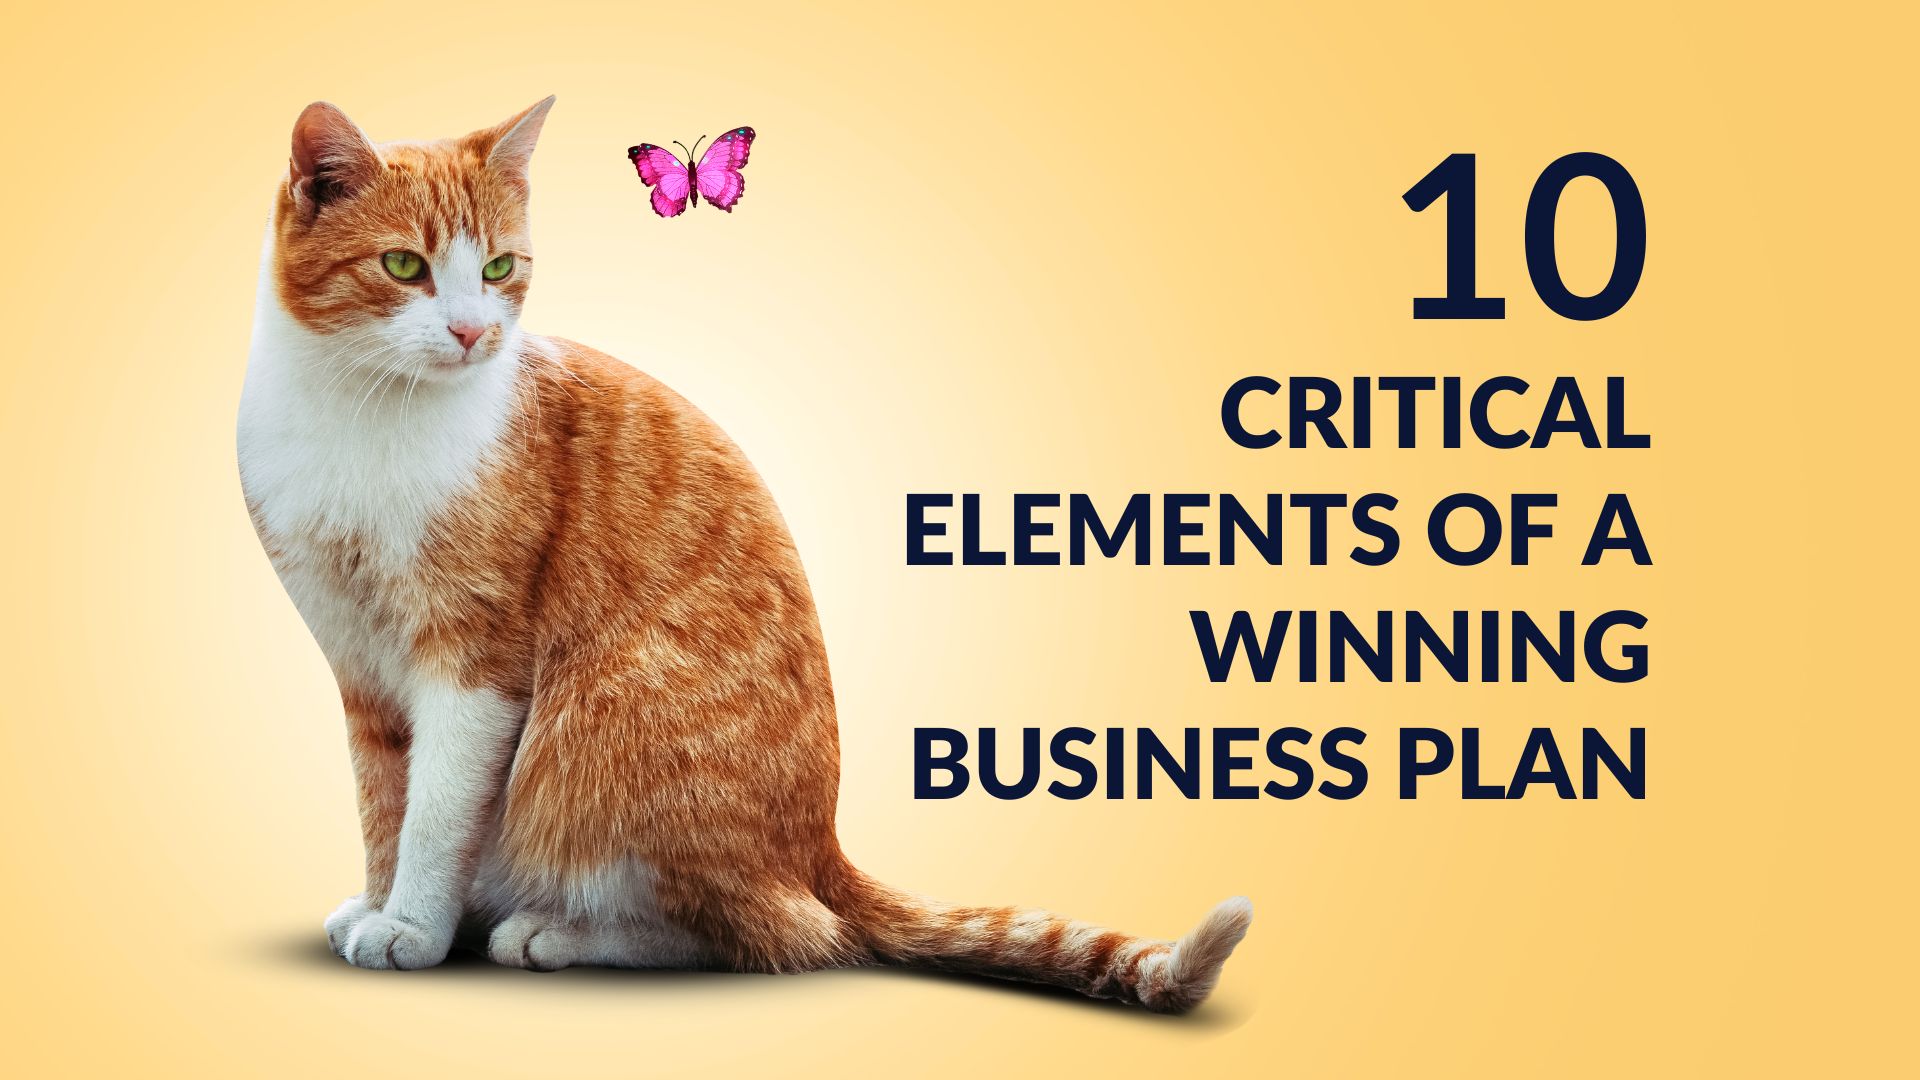 The Student Entrepreneur’s Guide to a Successful Business: Ten Critical Elements of a Winning Business Plan